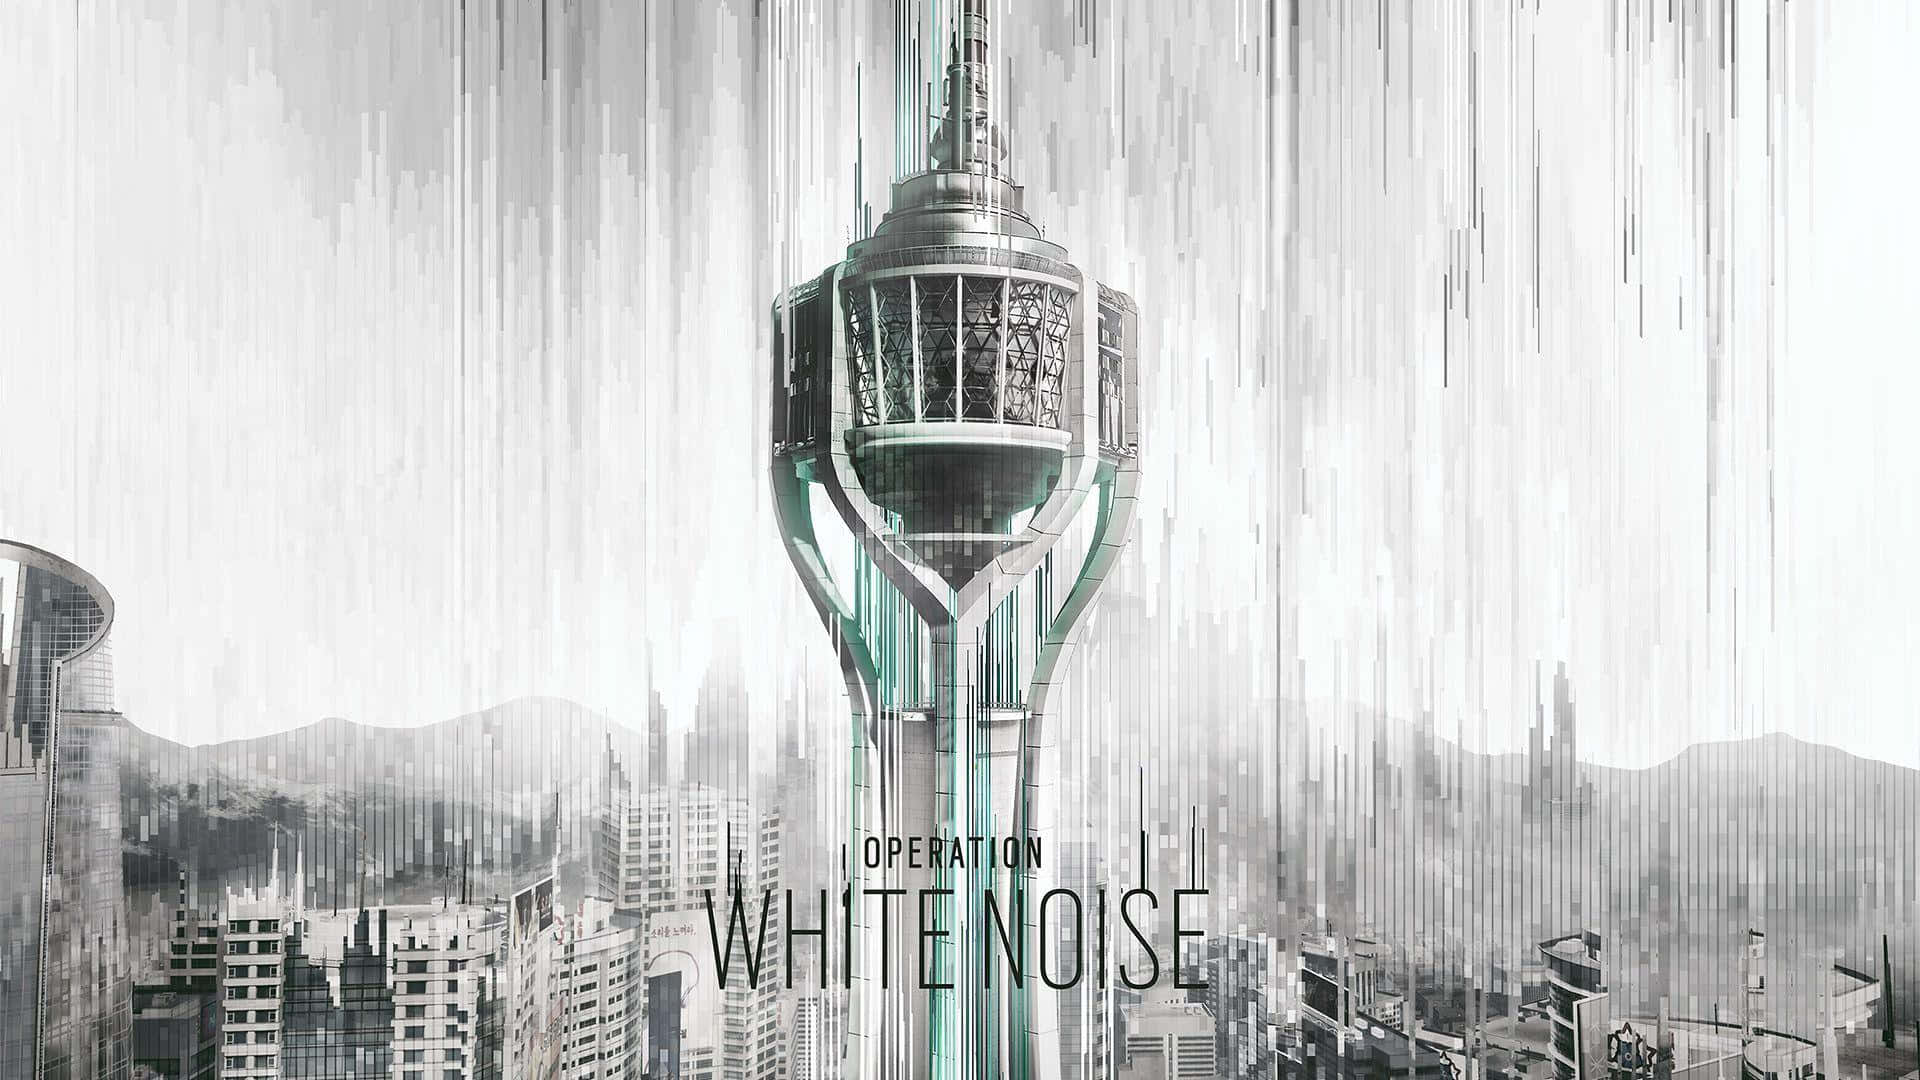 Embrace the beautiful and peaceful chaos of white noise. Wallpaper